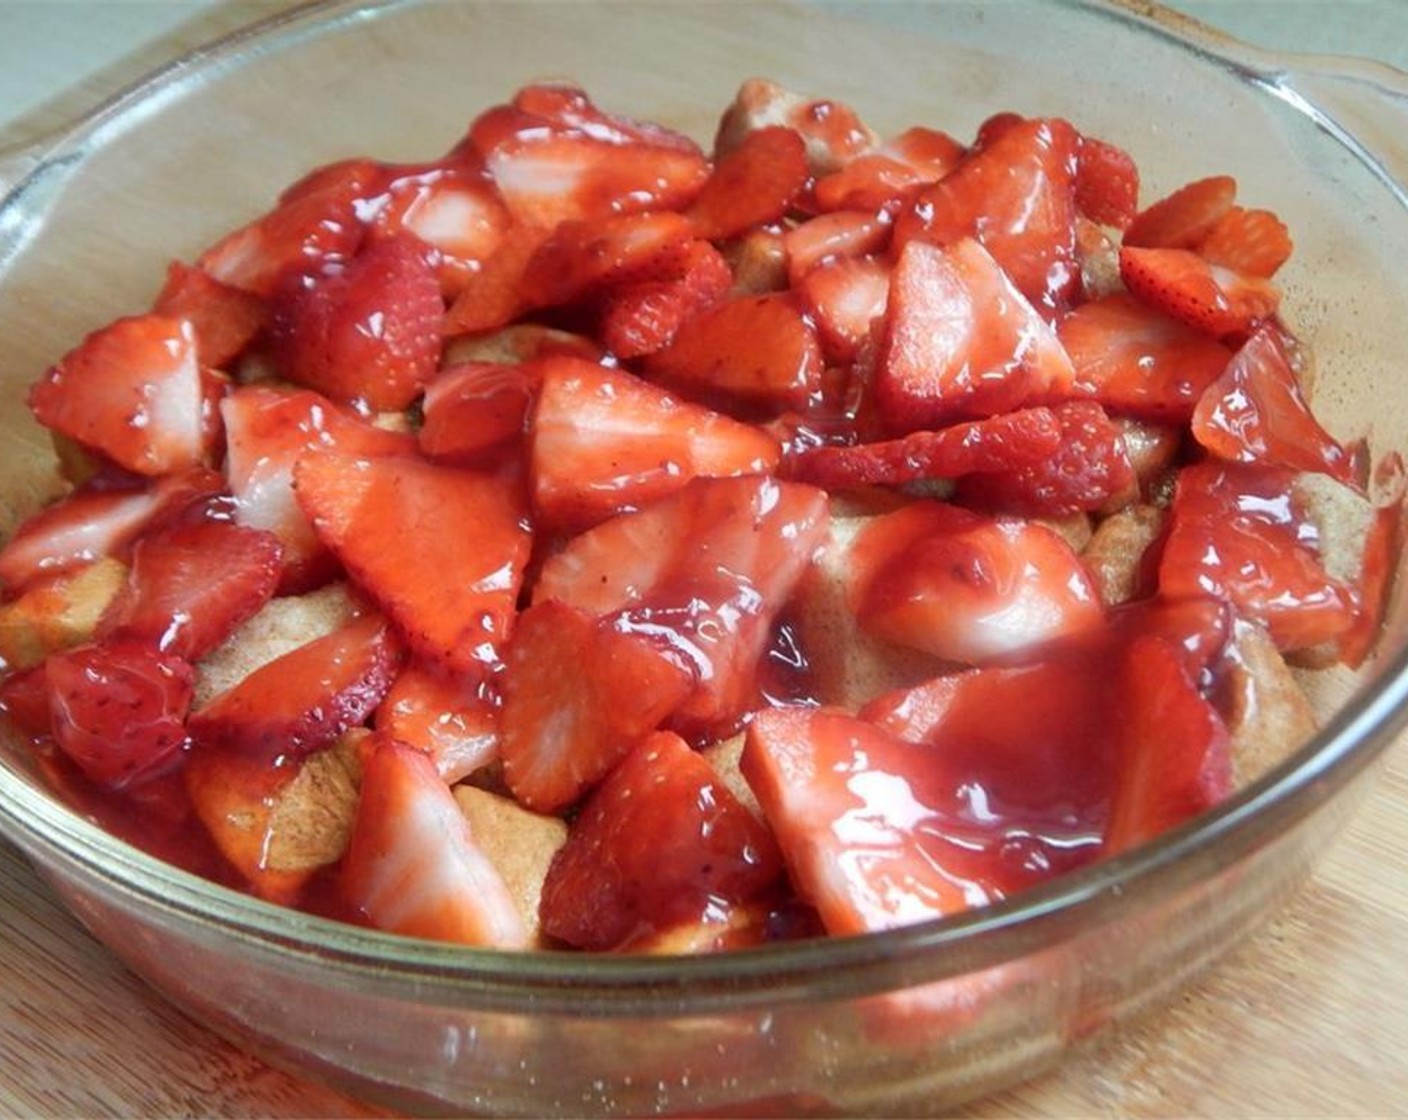 step 5 Melt your Reduced Sugar Strawberry Jam (1/4 cup) in the microwave for 30 seconds and drizzle over your strawberries.